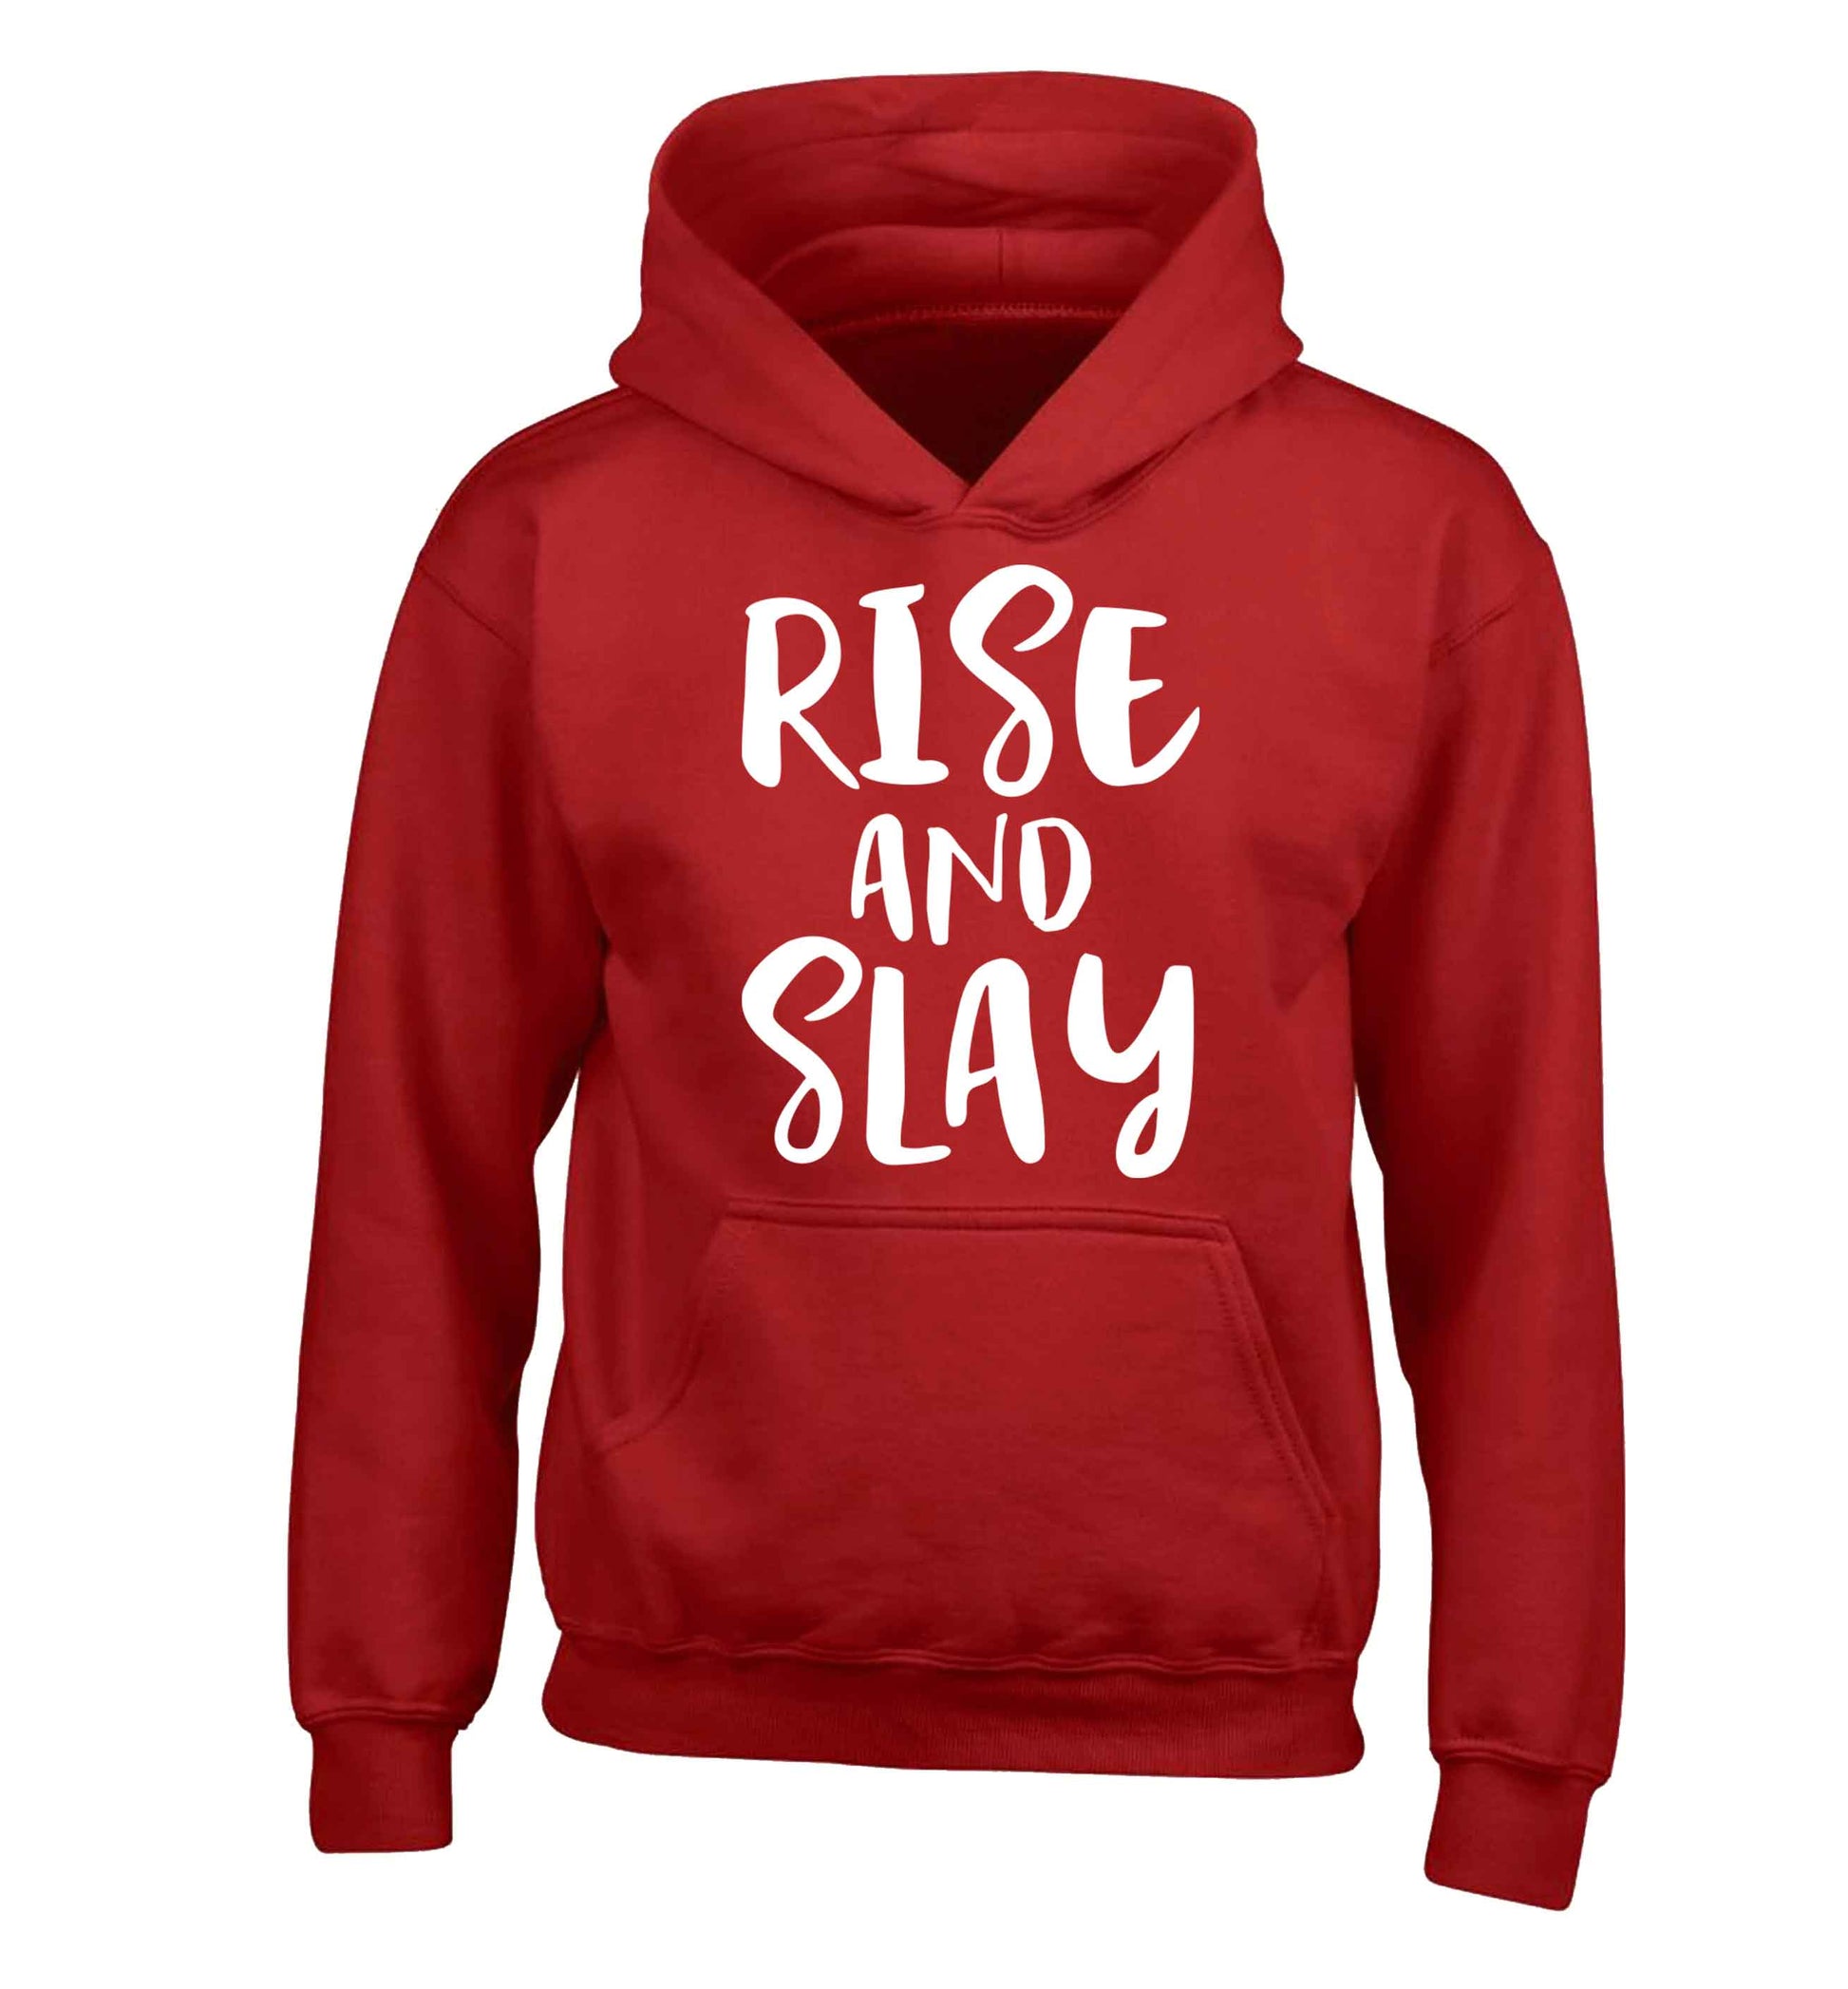 Rise and slay children's red hoodie 12-13 Years